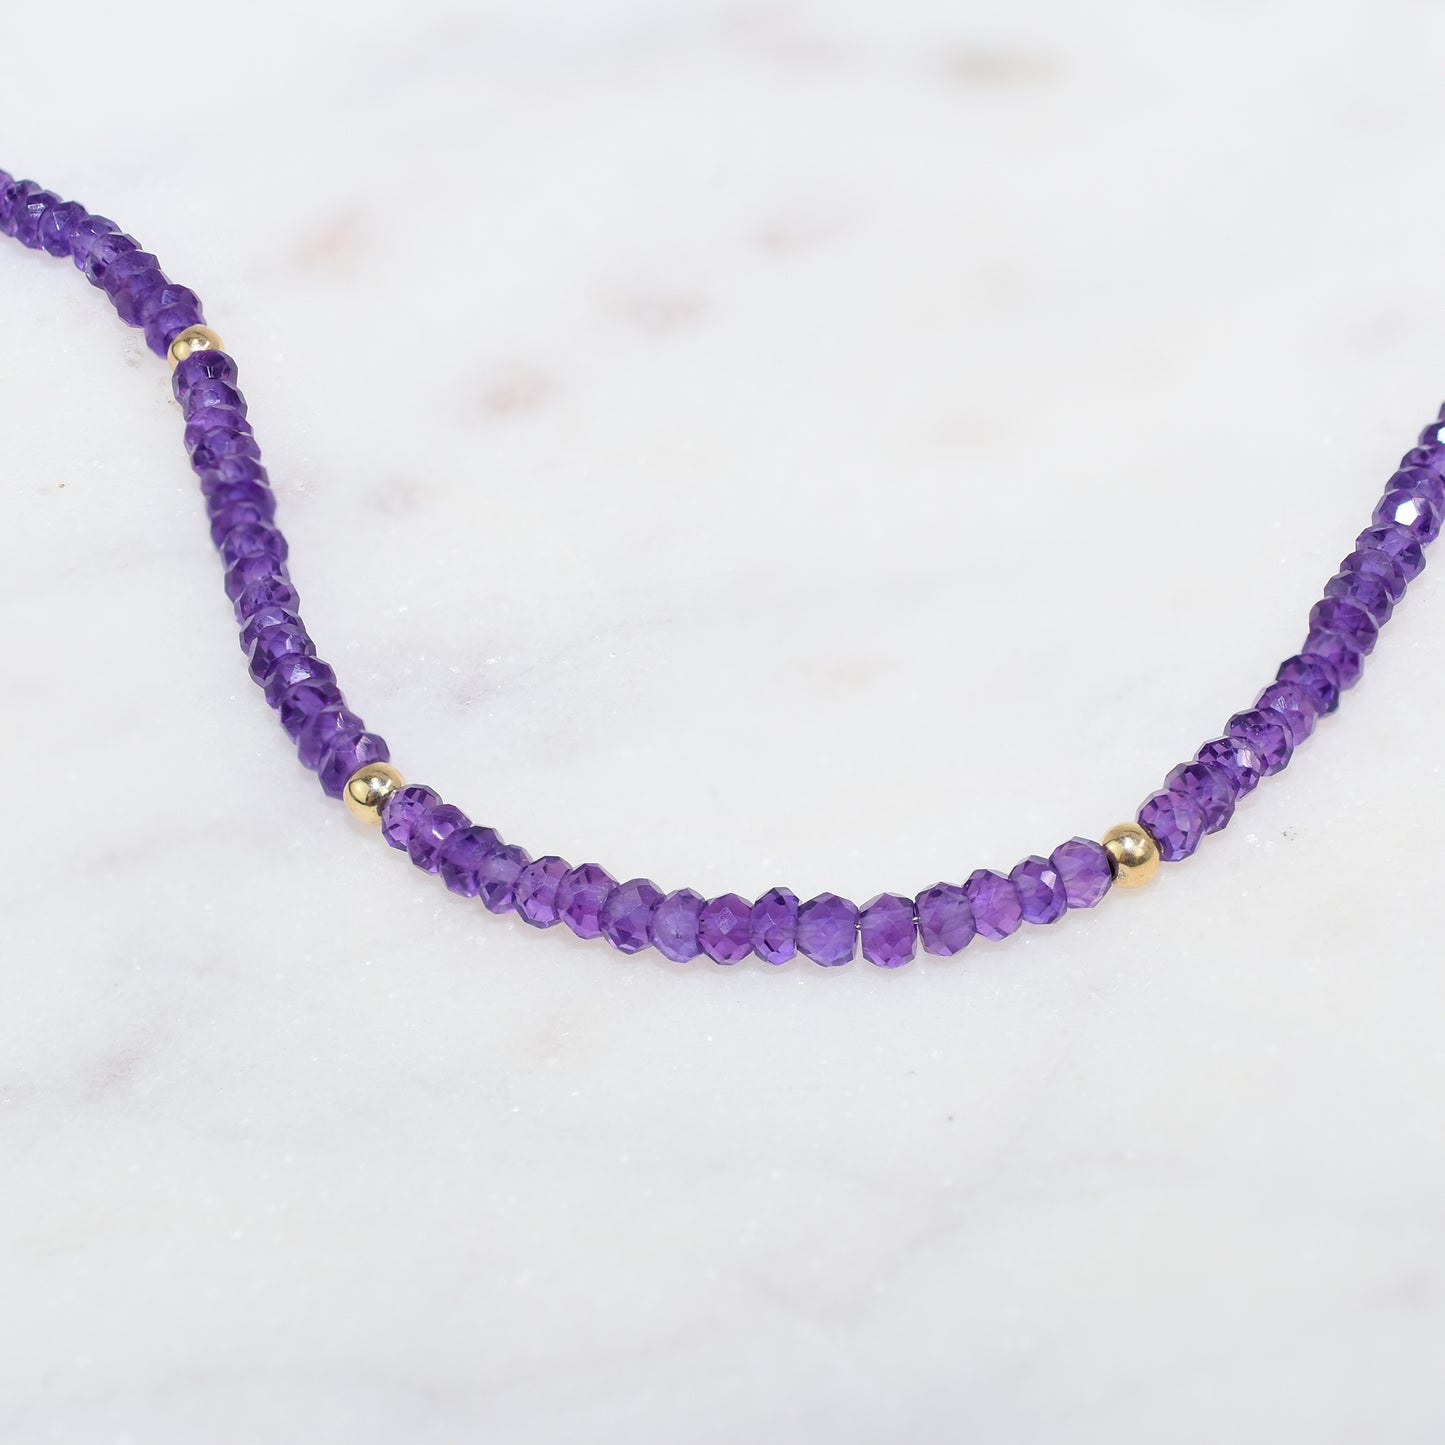 14k Amethyst & Gold Ball Necklace 17"